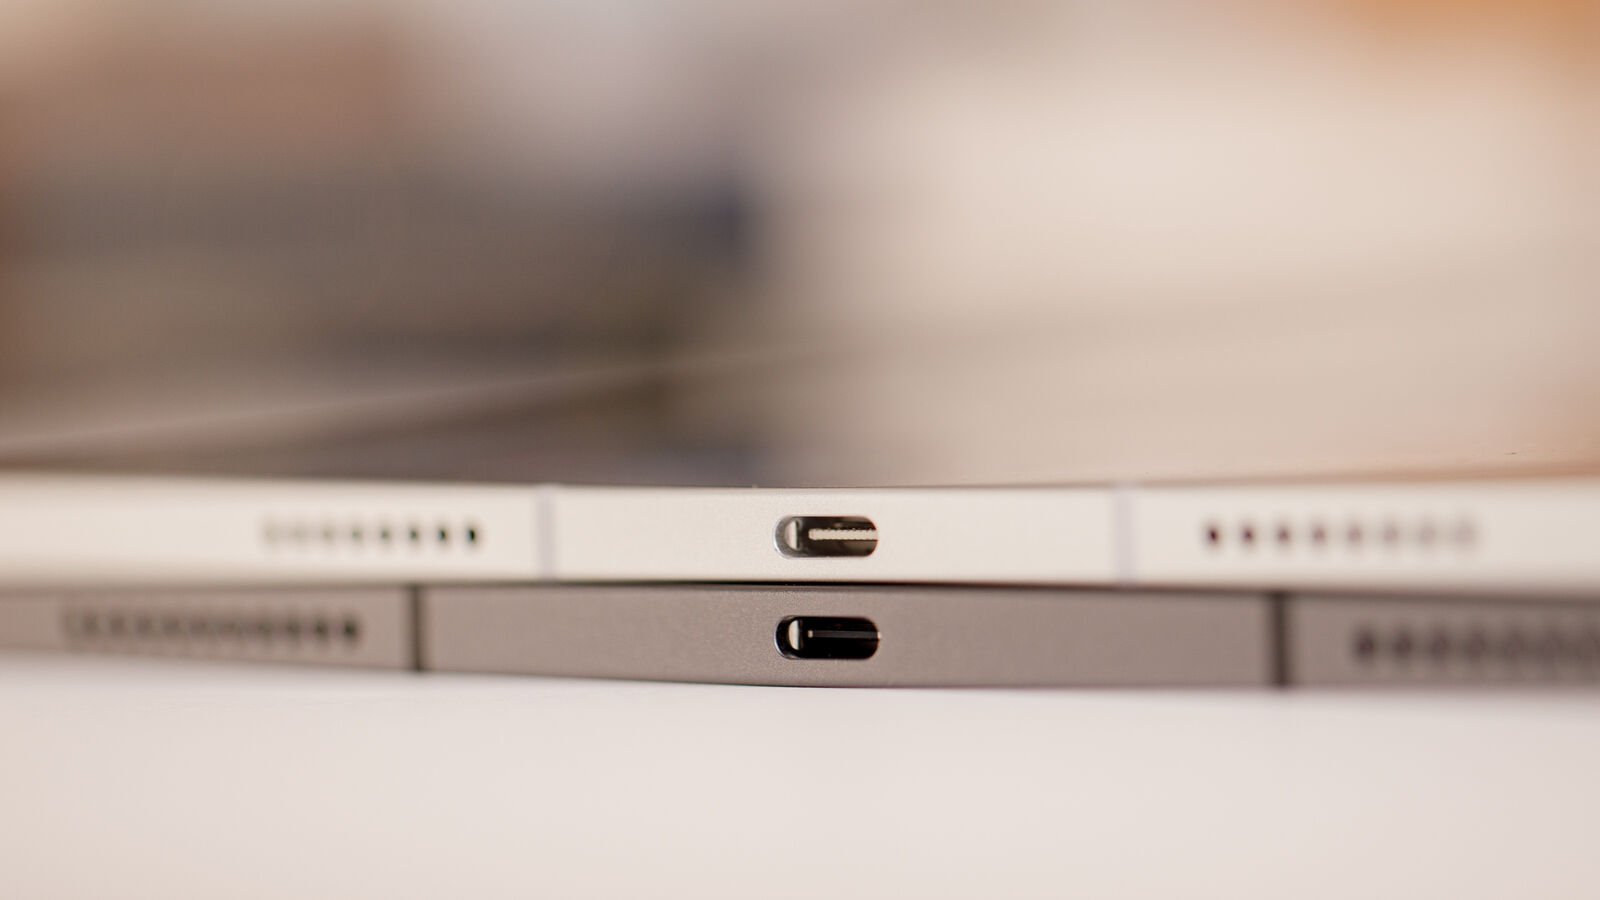 How to identify which iPad model you have: USB-C port